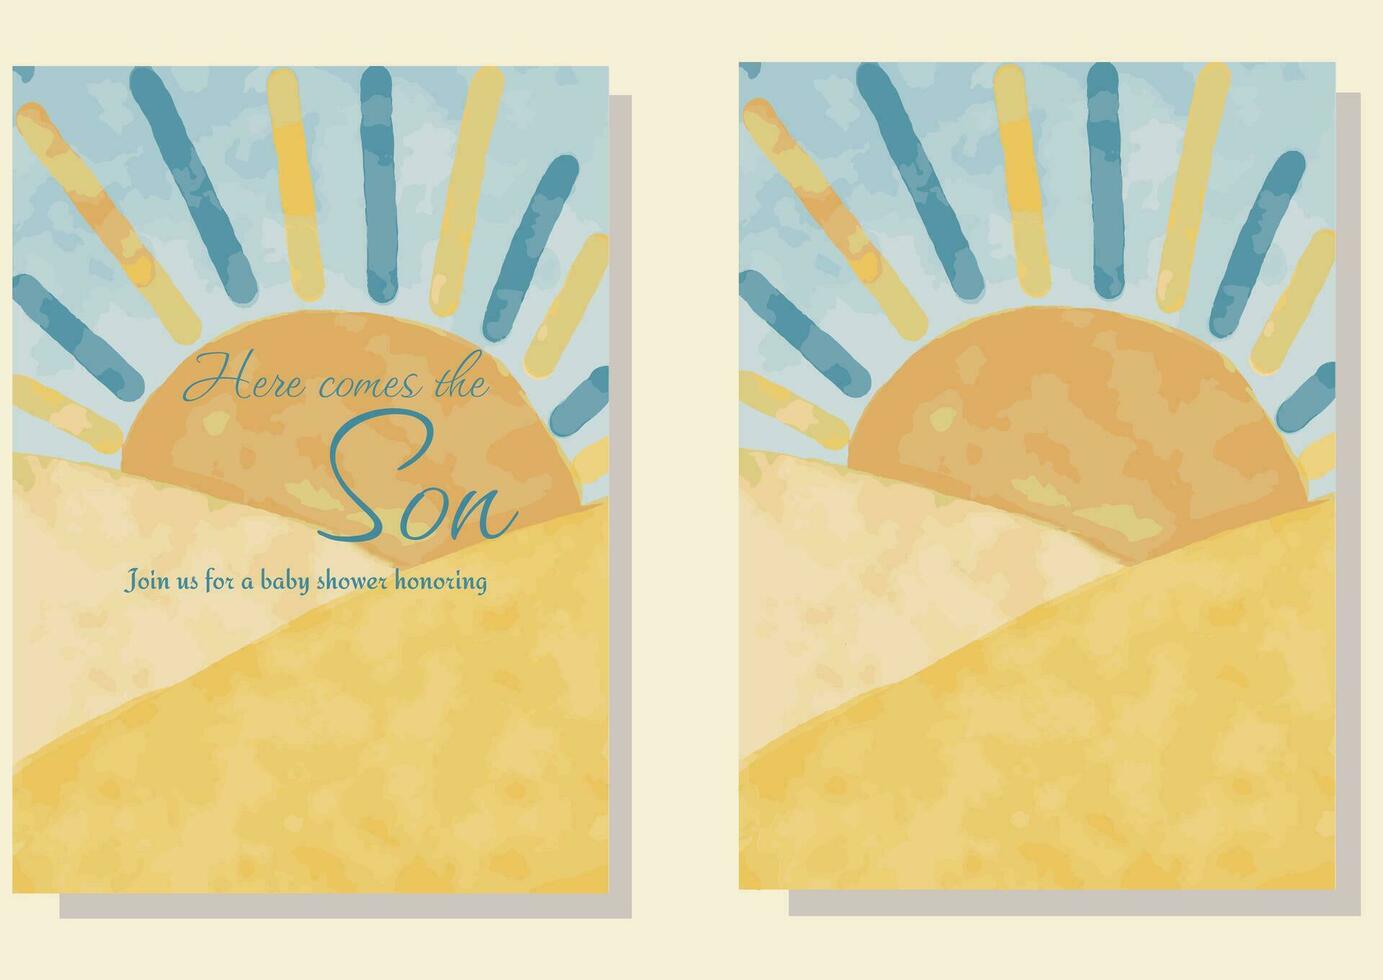 Sun Landscape Background for a Here Comes the Son Sunshine Baby Shower Theme. Ready for posters, bannes, cards, invitations and more. Just add the text in any editor you wish vector